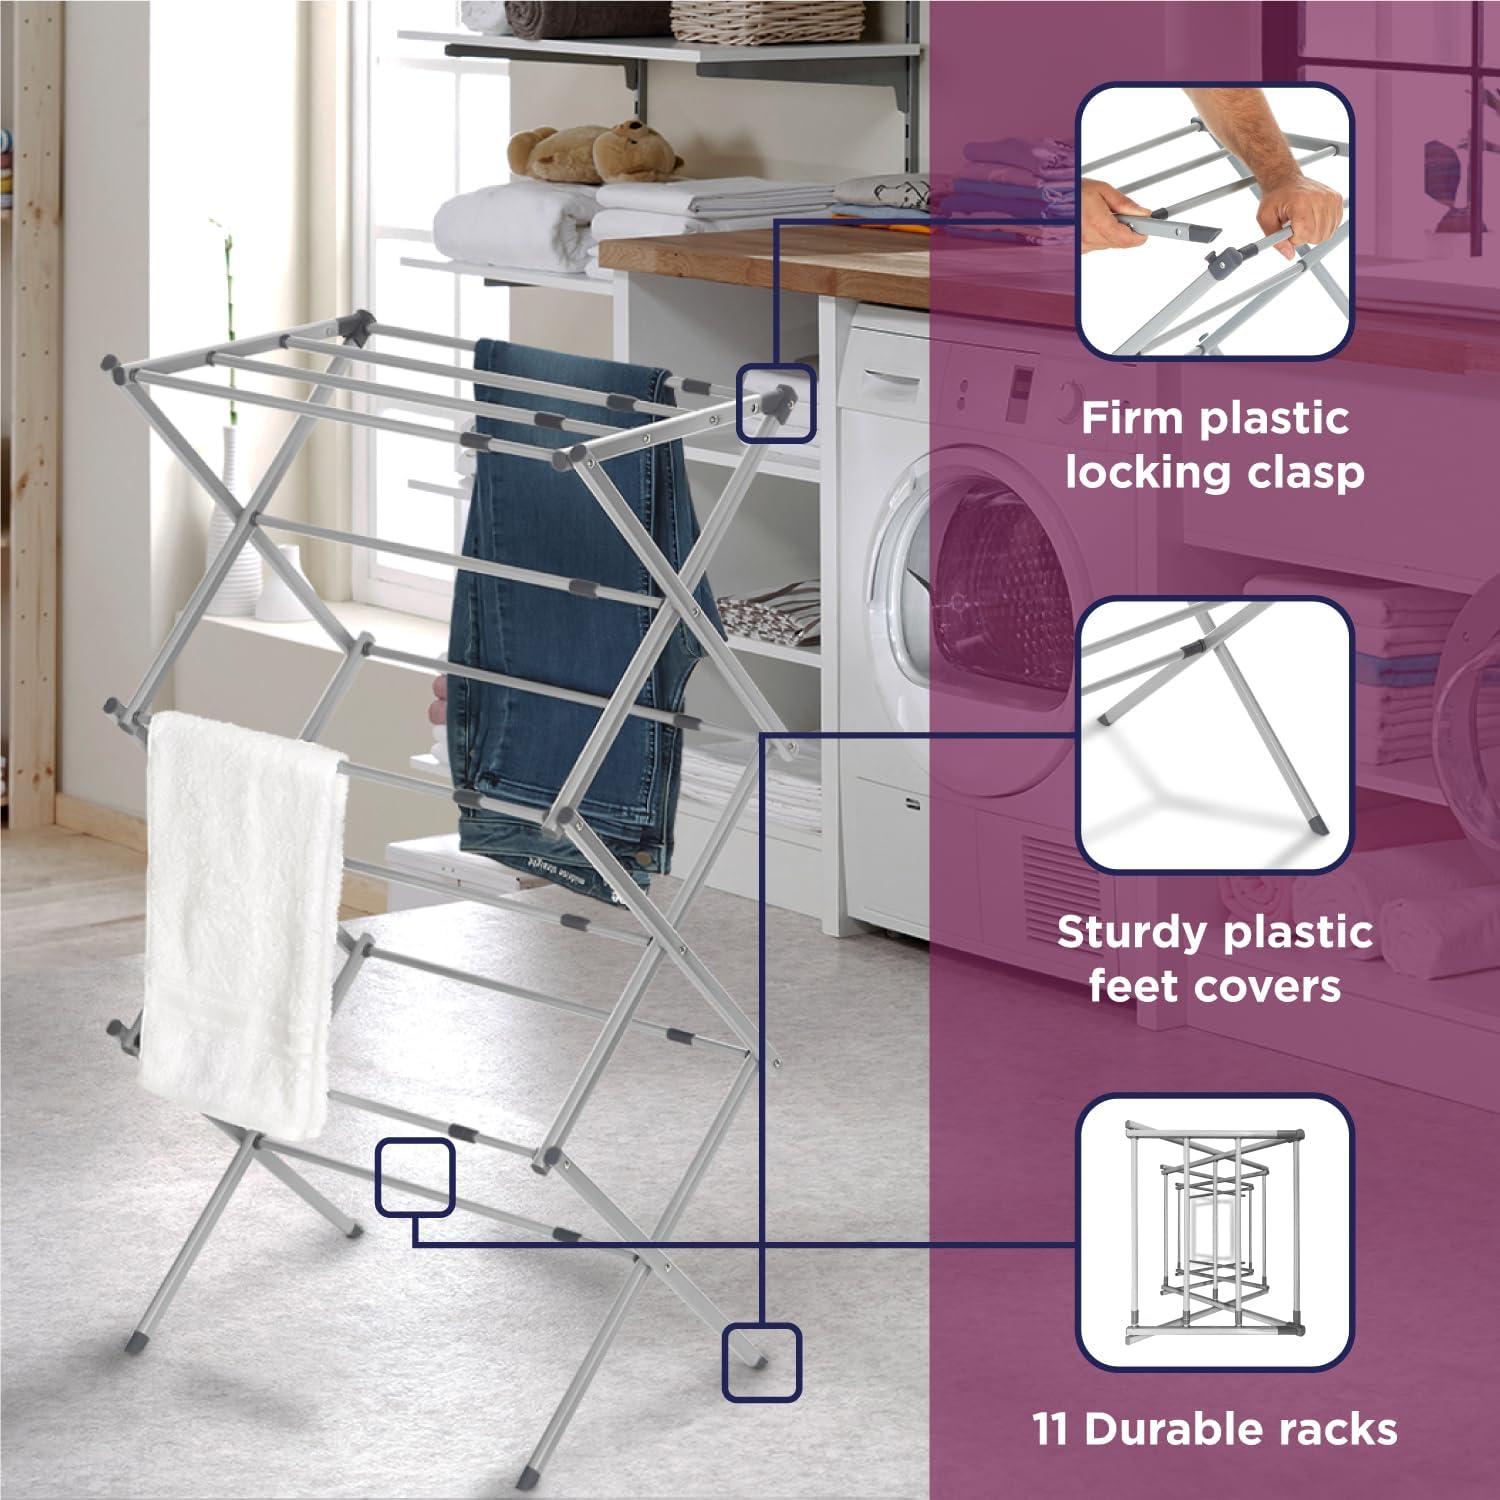 Oversize Collapsible Clothes Drying Rack 